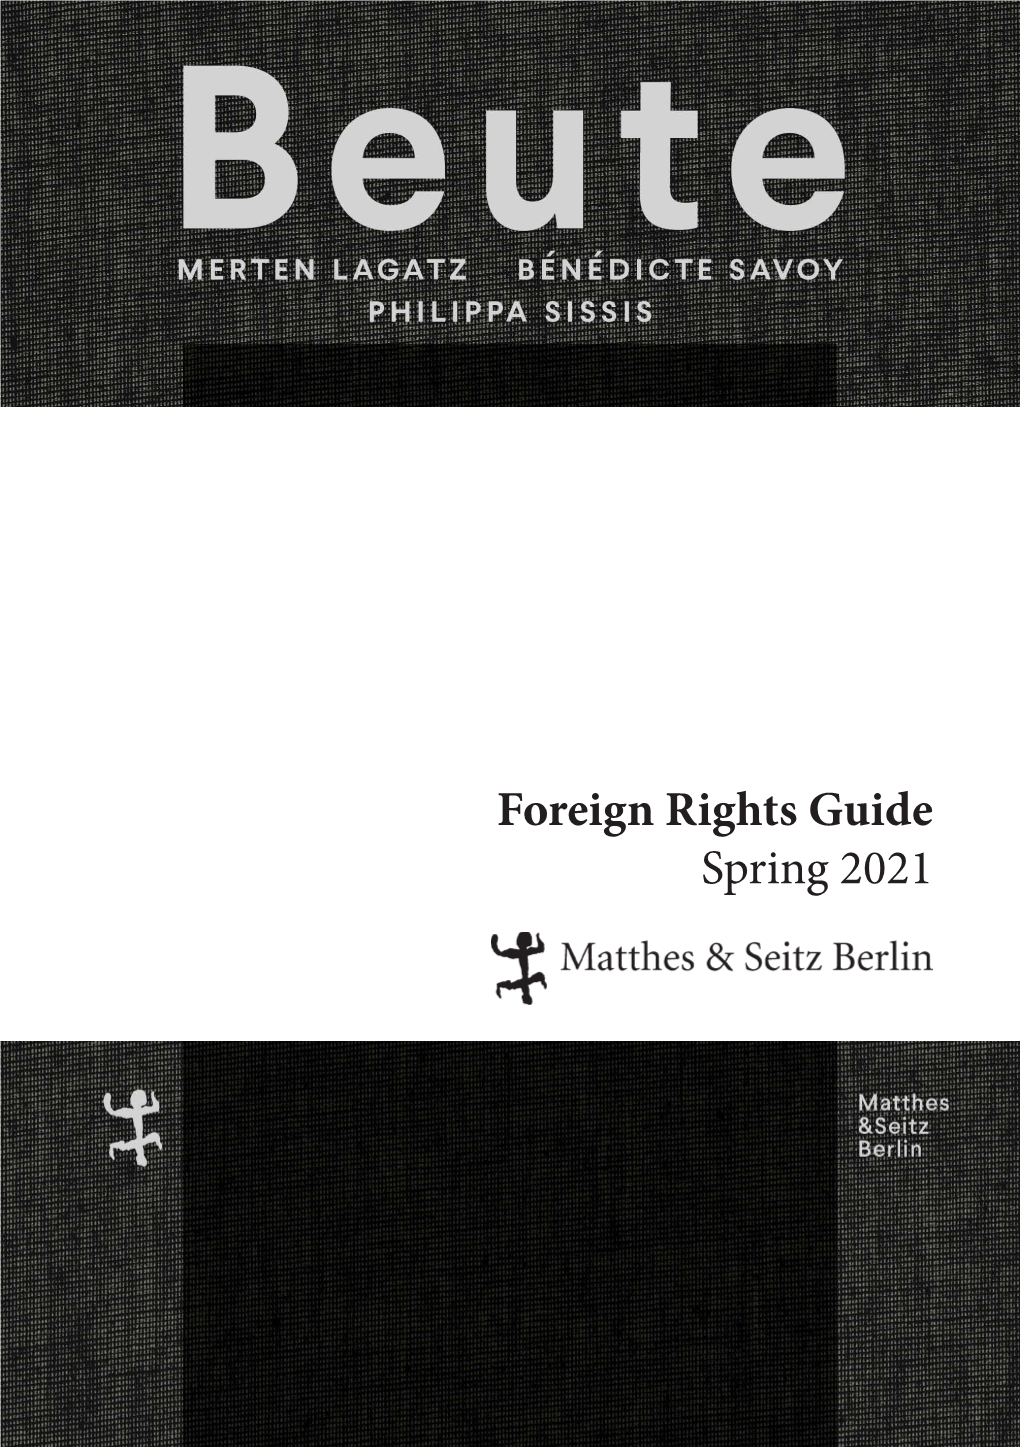 Foreign Rights Guide Spring 2021 Matthes & Seitz Berlin Is a German Independent Publishing House Founded in 2004 by Andreas Rötzer